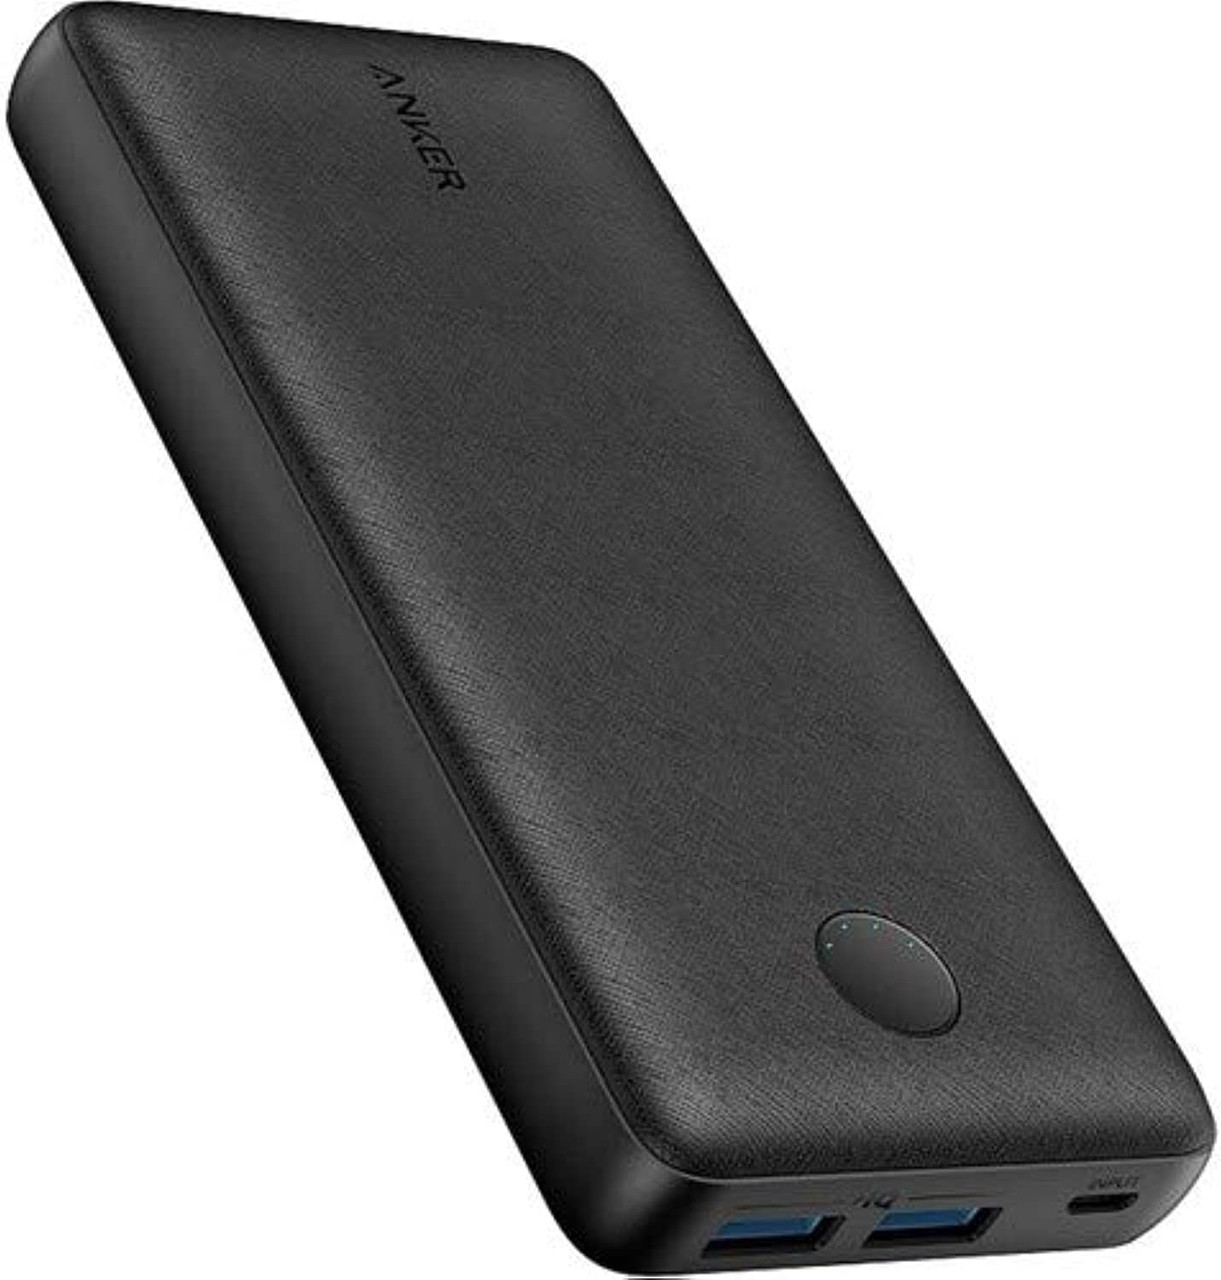 Anker Power Core Select 20000 Power Bank, Black, A1363H11, AYOUB  COMPUTERS